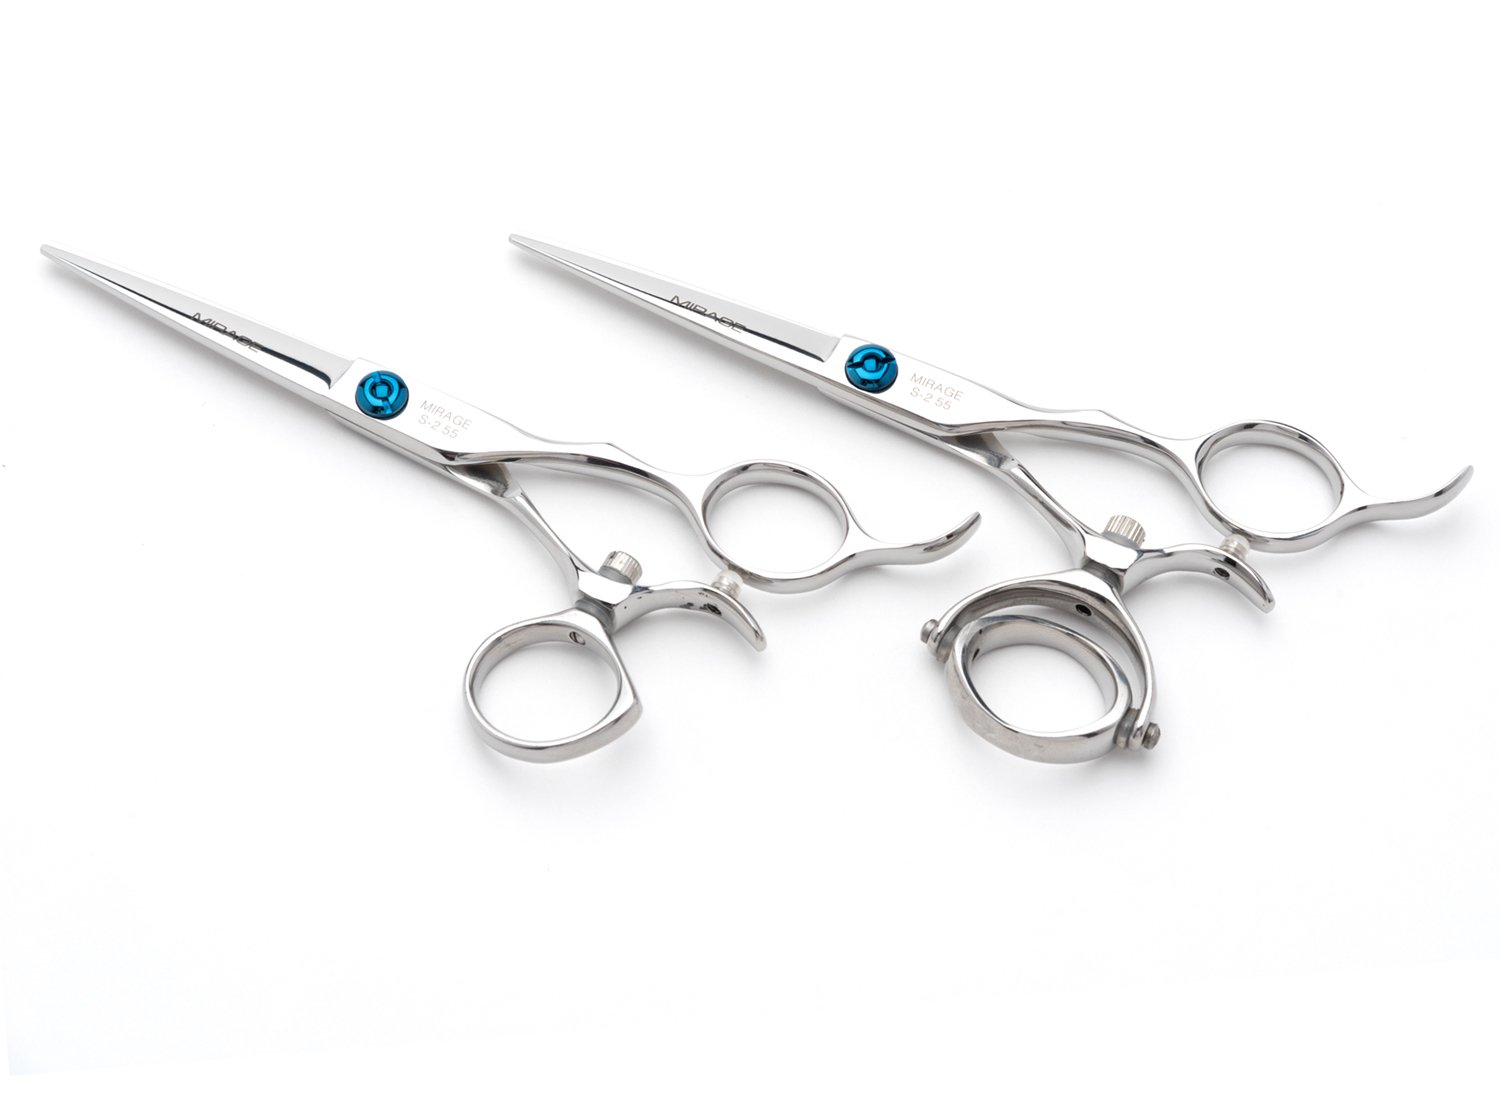 How to Hold Hairdressing Scissors Correctly